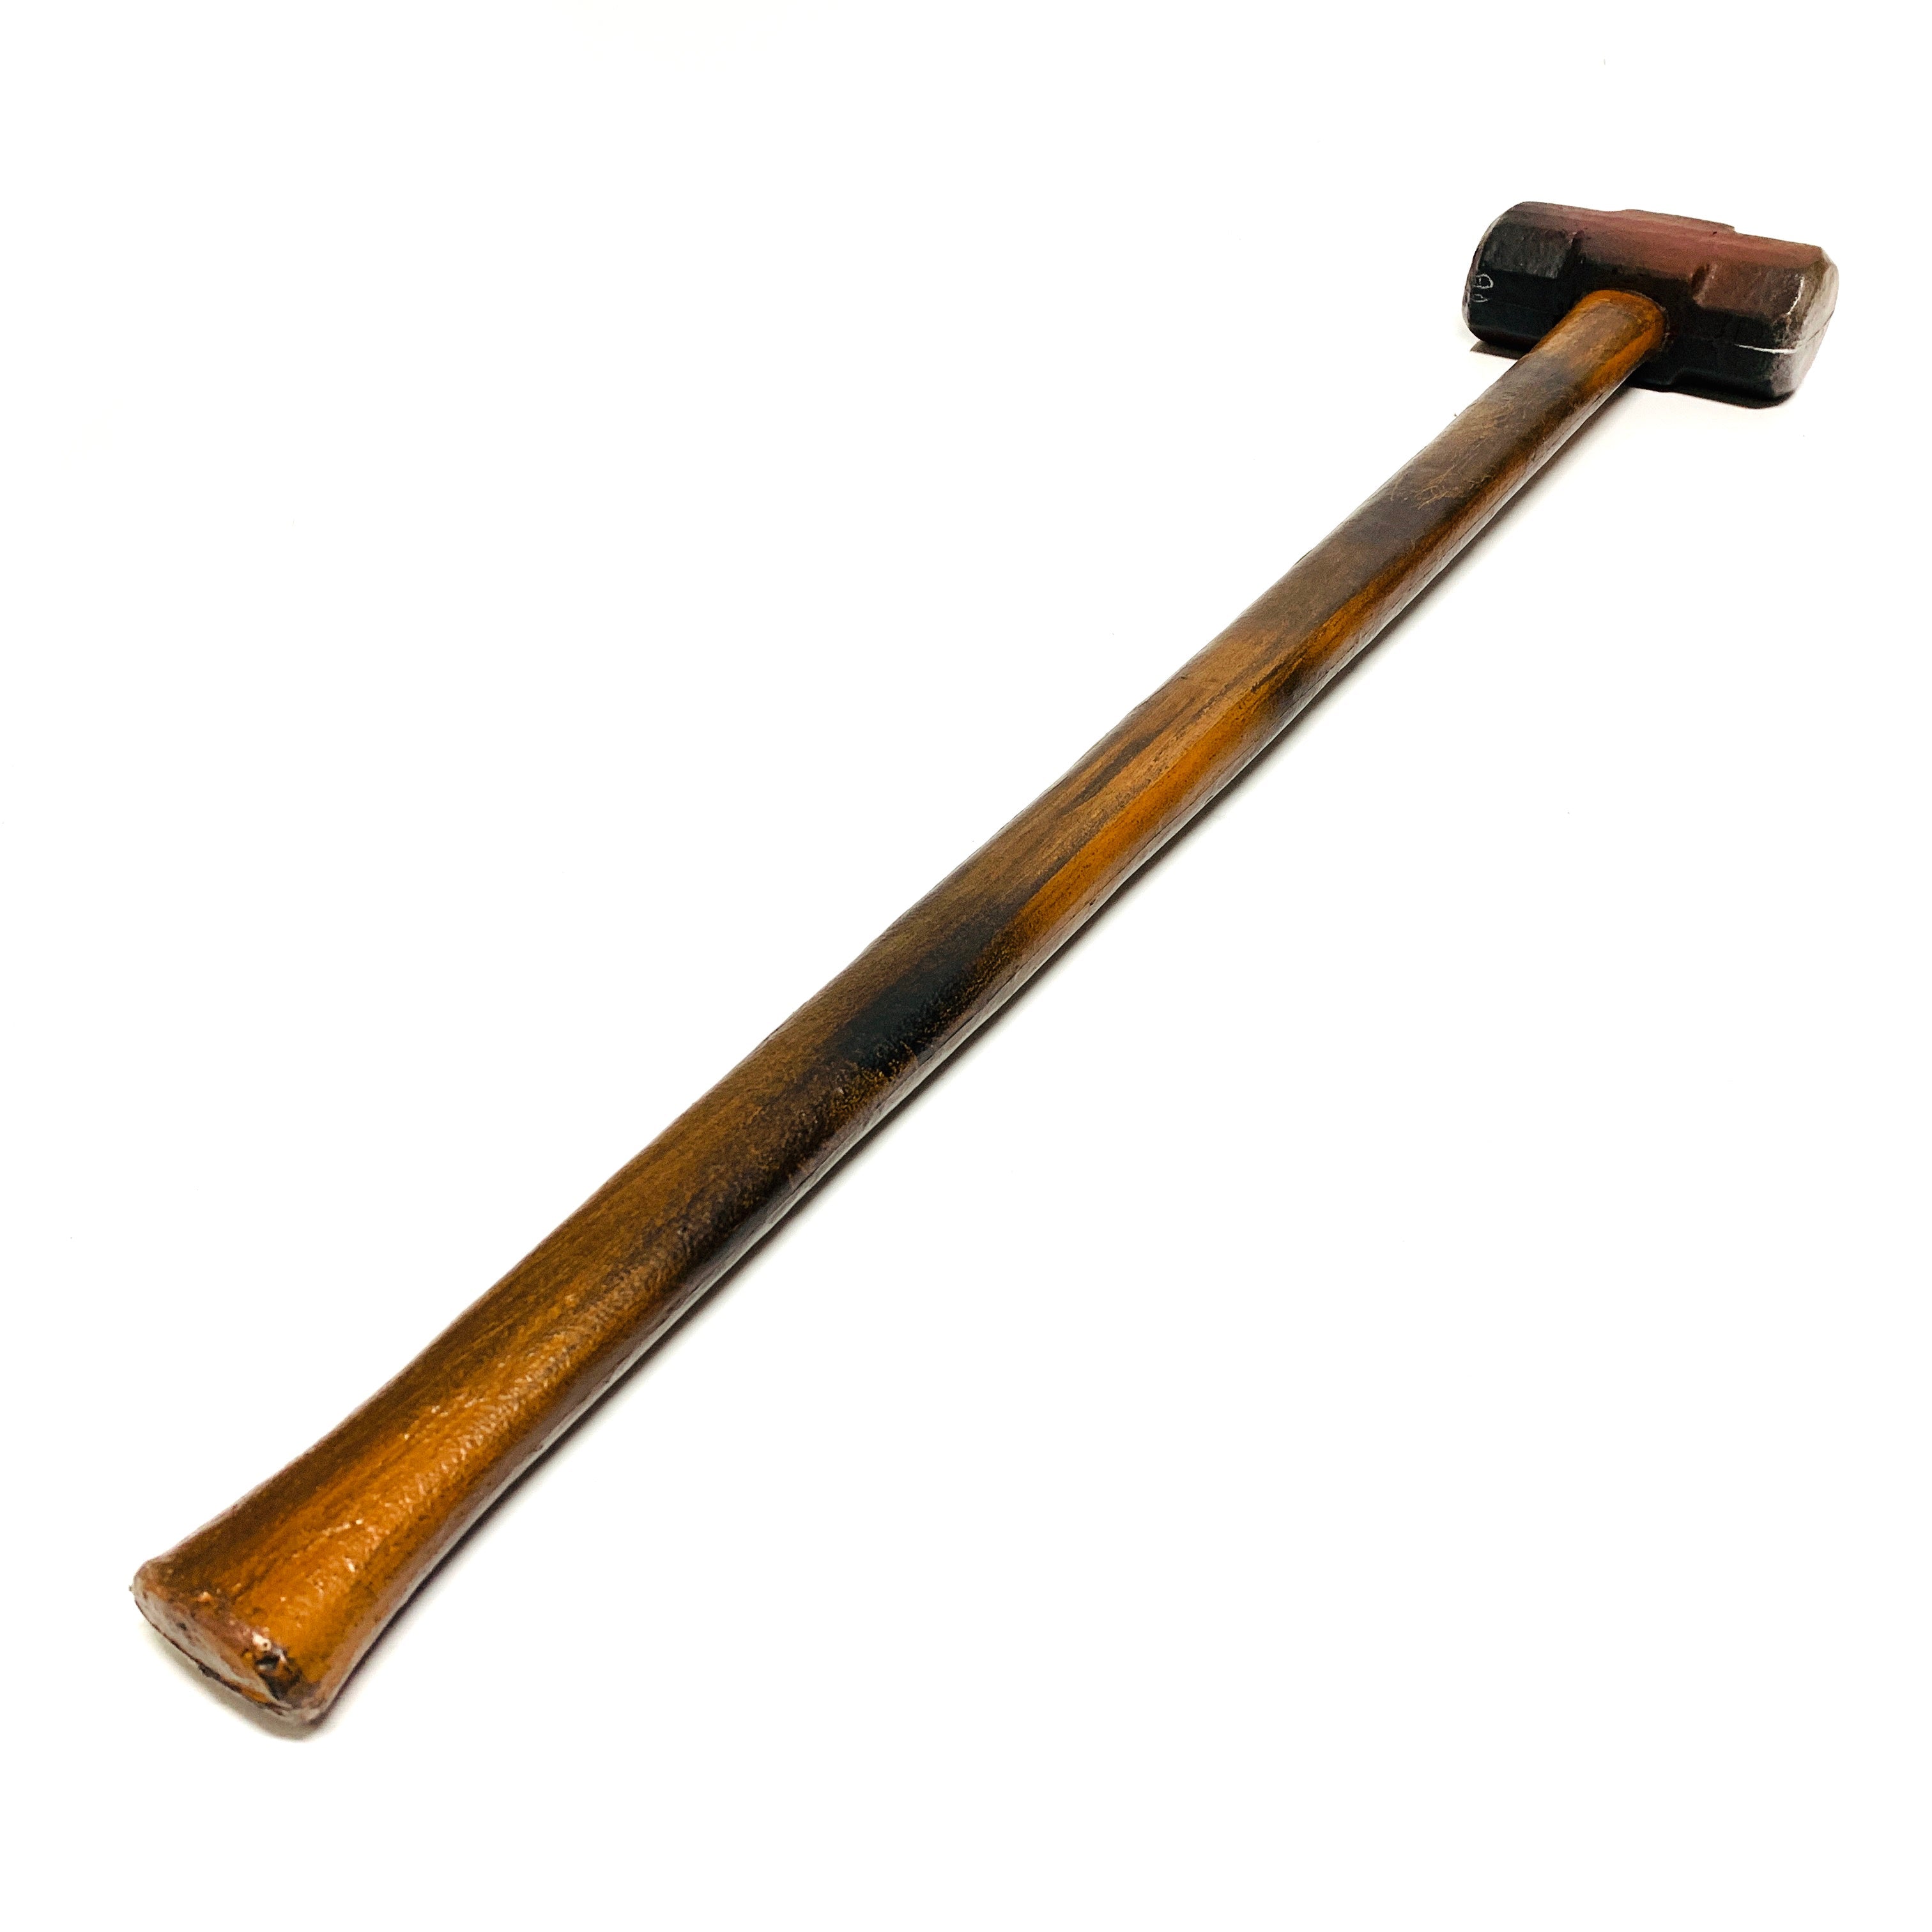 Foam LARGE 34 Inch Rubber Sledgehammer Stunt Prop - RUSTY - Rusty Head with Aged Handle